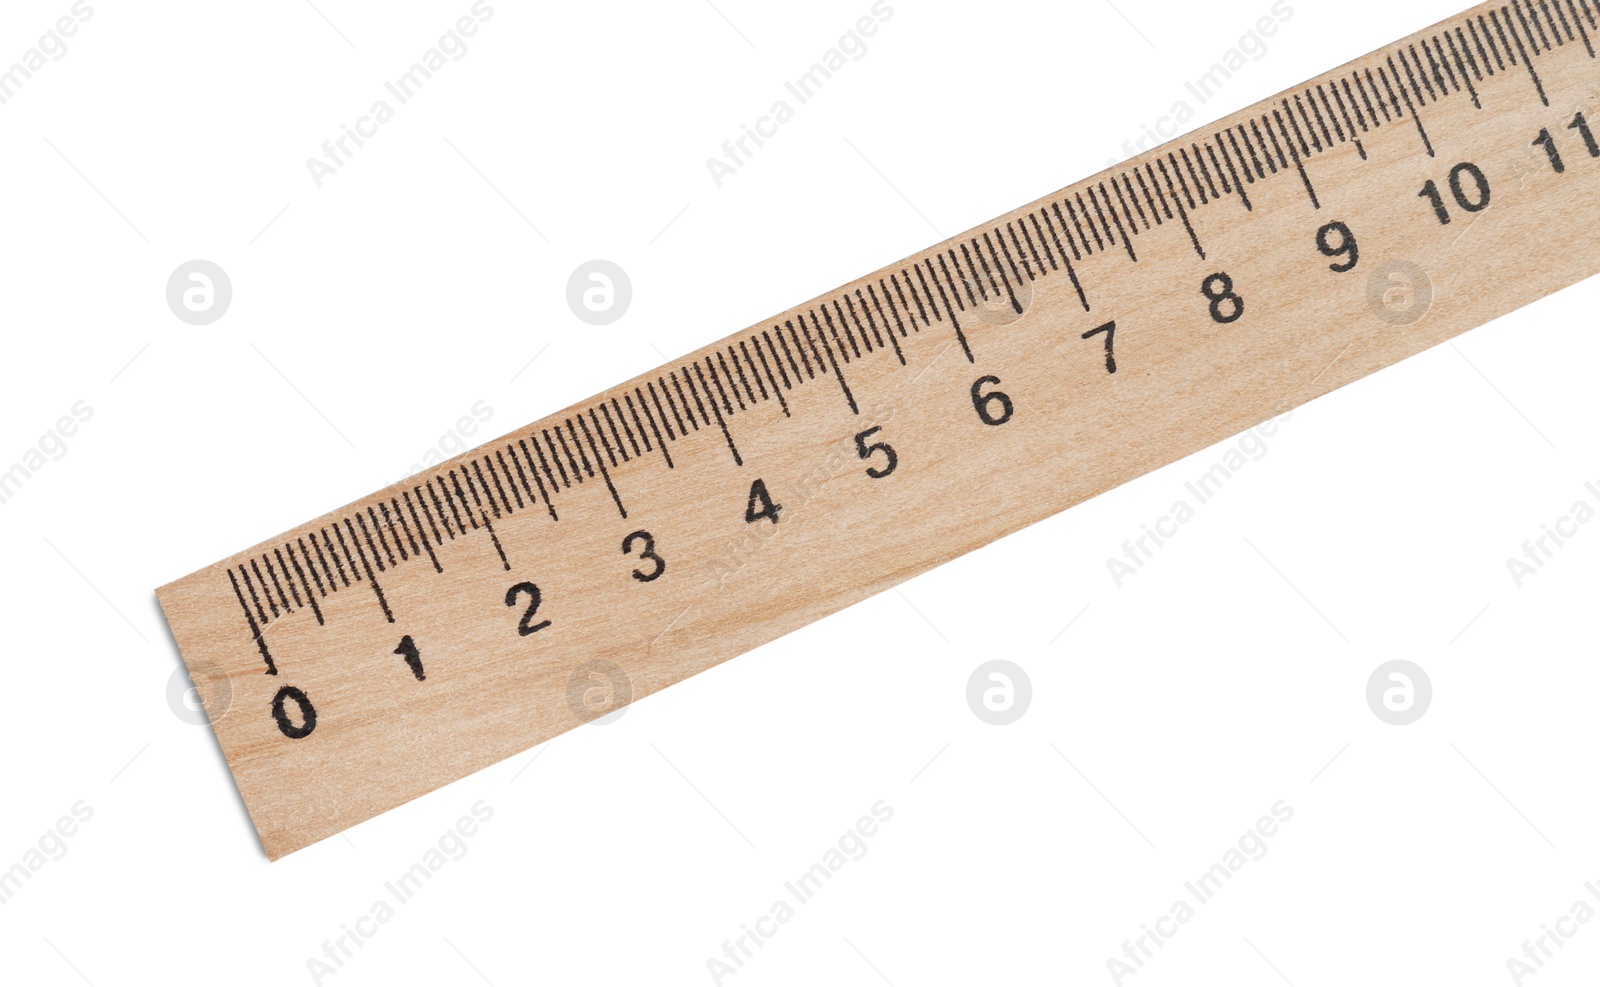 Photo of Wooden ruler with measuring length markings in centimeters isolated on white